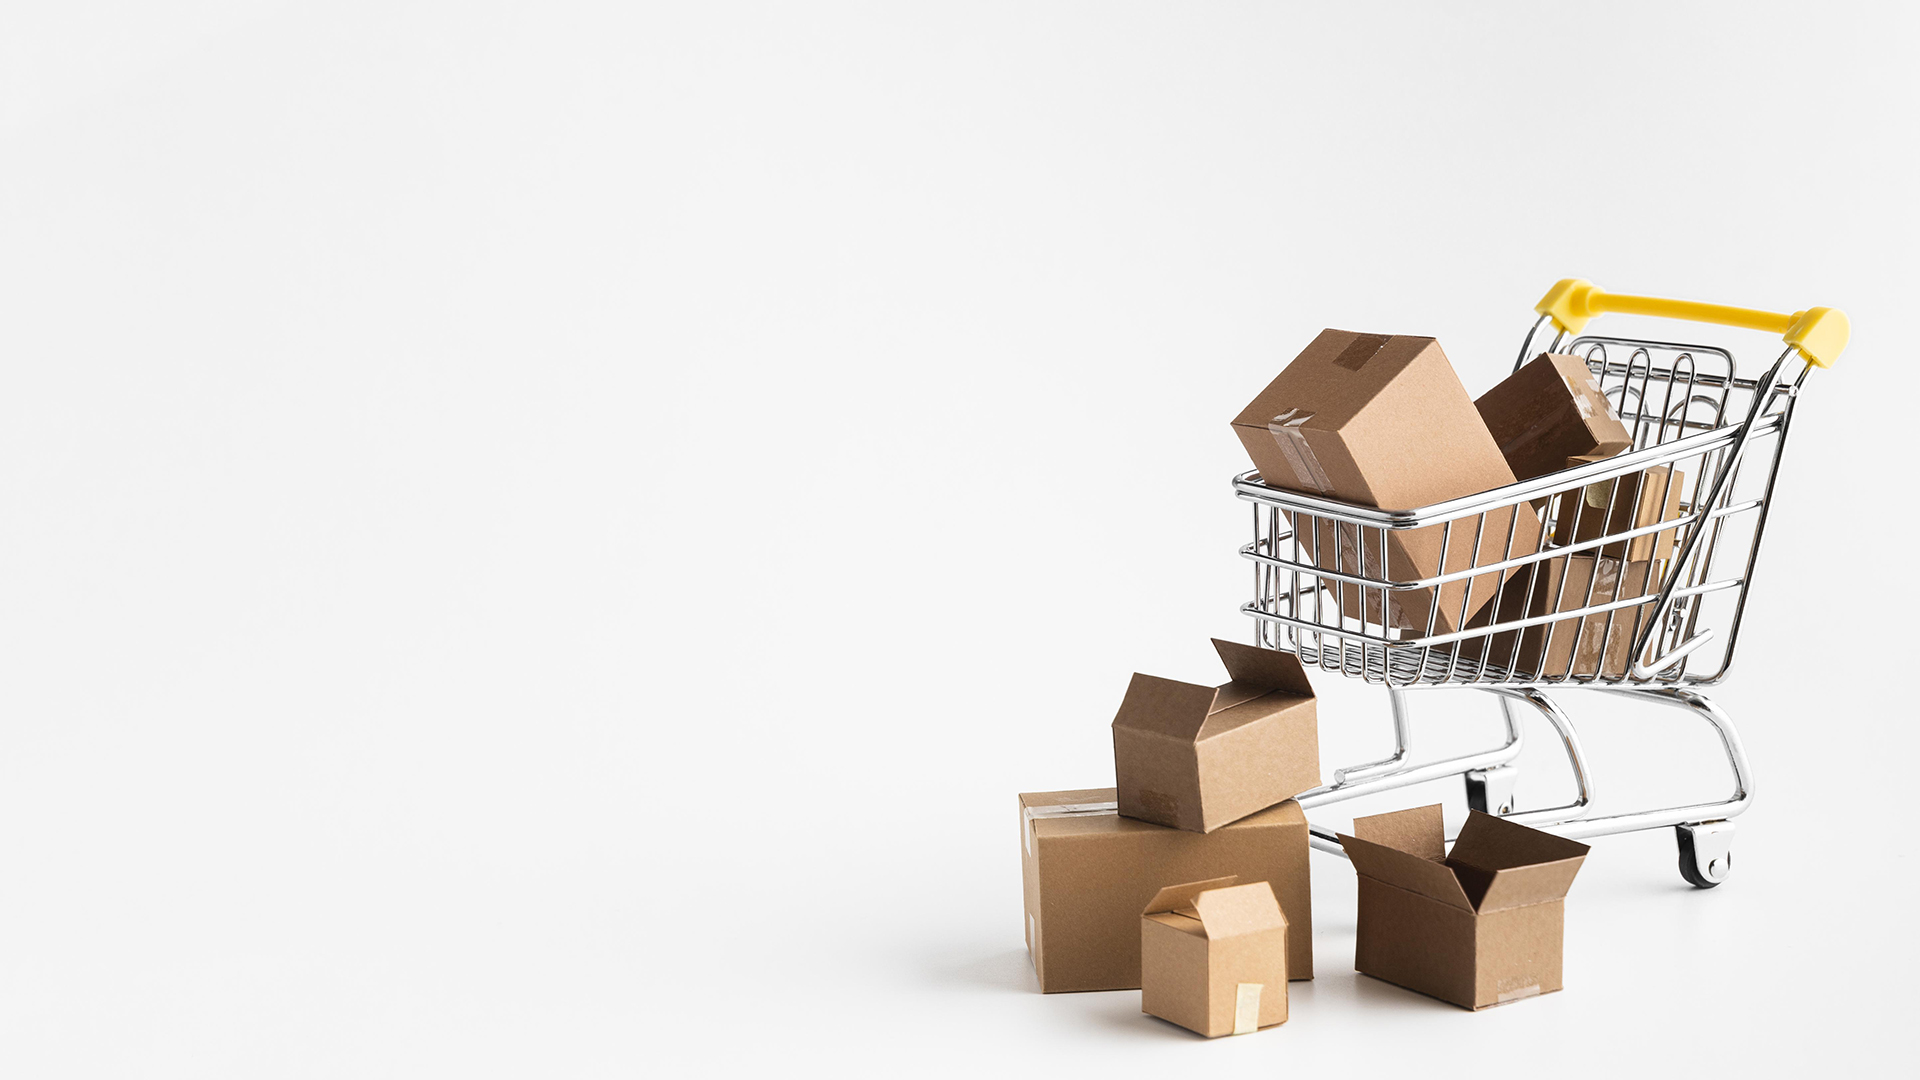 In the right half of the picture there is a shopping cart in front of a white background, filled with cardboard boxes, some cardboard boxes are lying on the floor in front of the cart